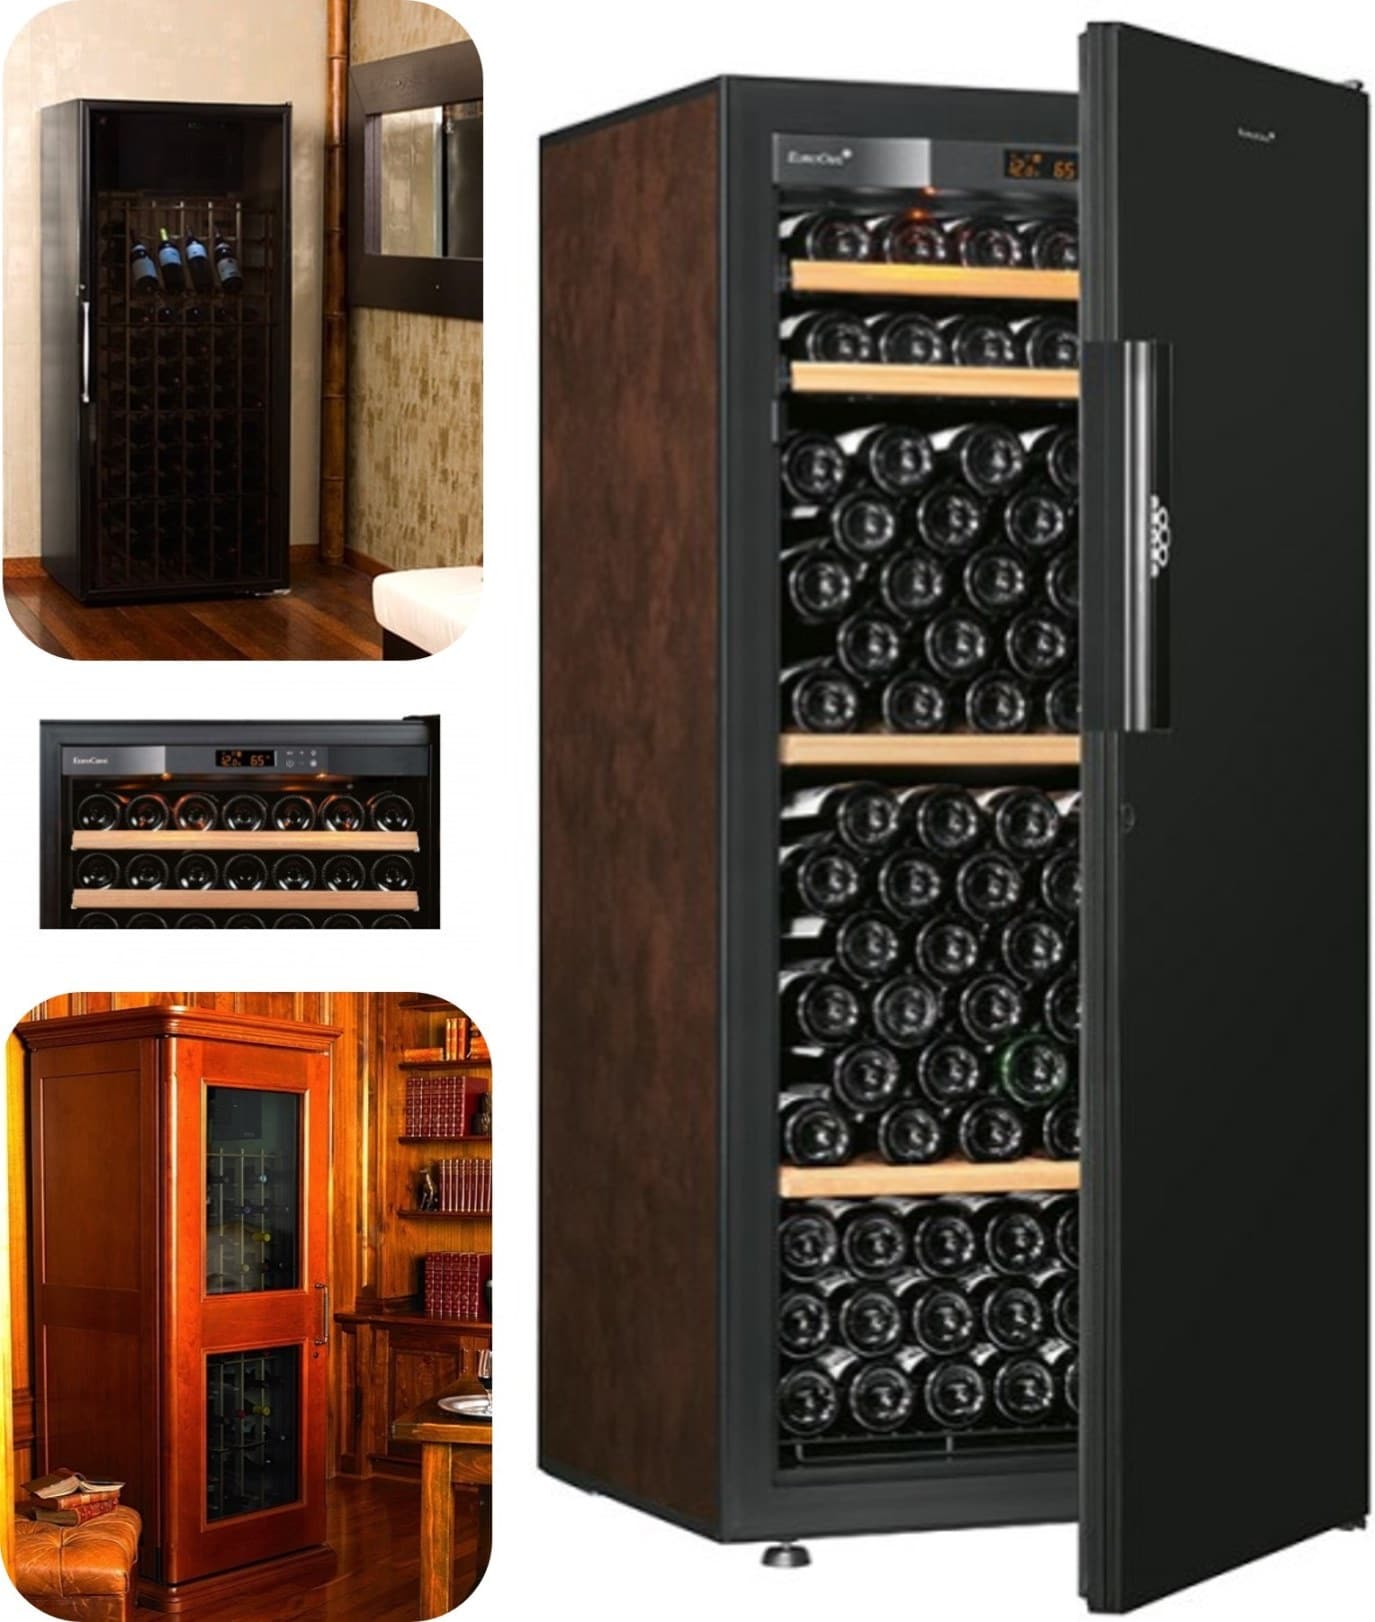 Turn Your Closet into a Beautiful Wine Cellar with Top-of-the-Line Wine Cabinets